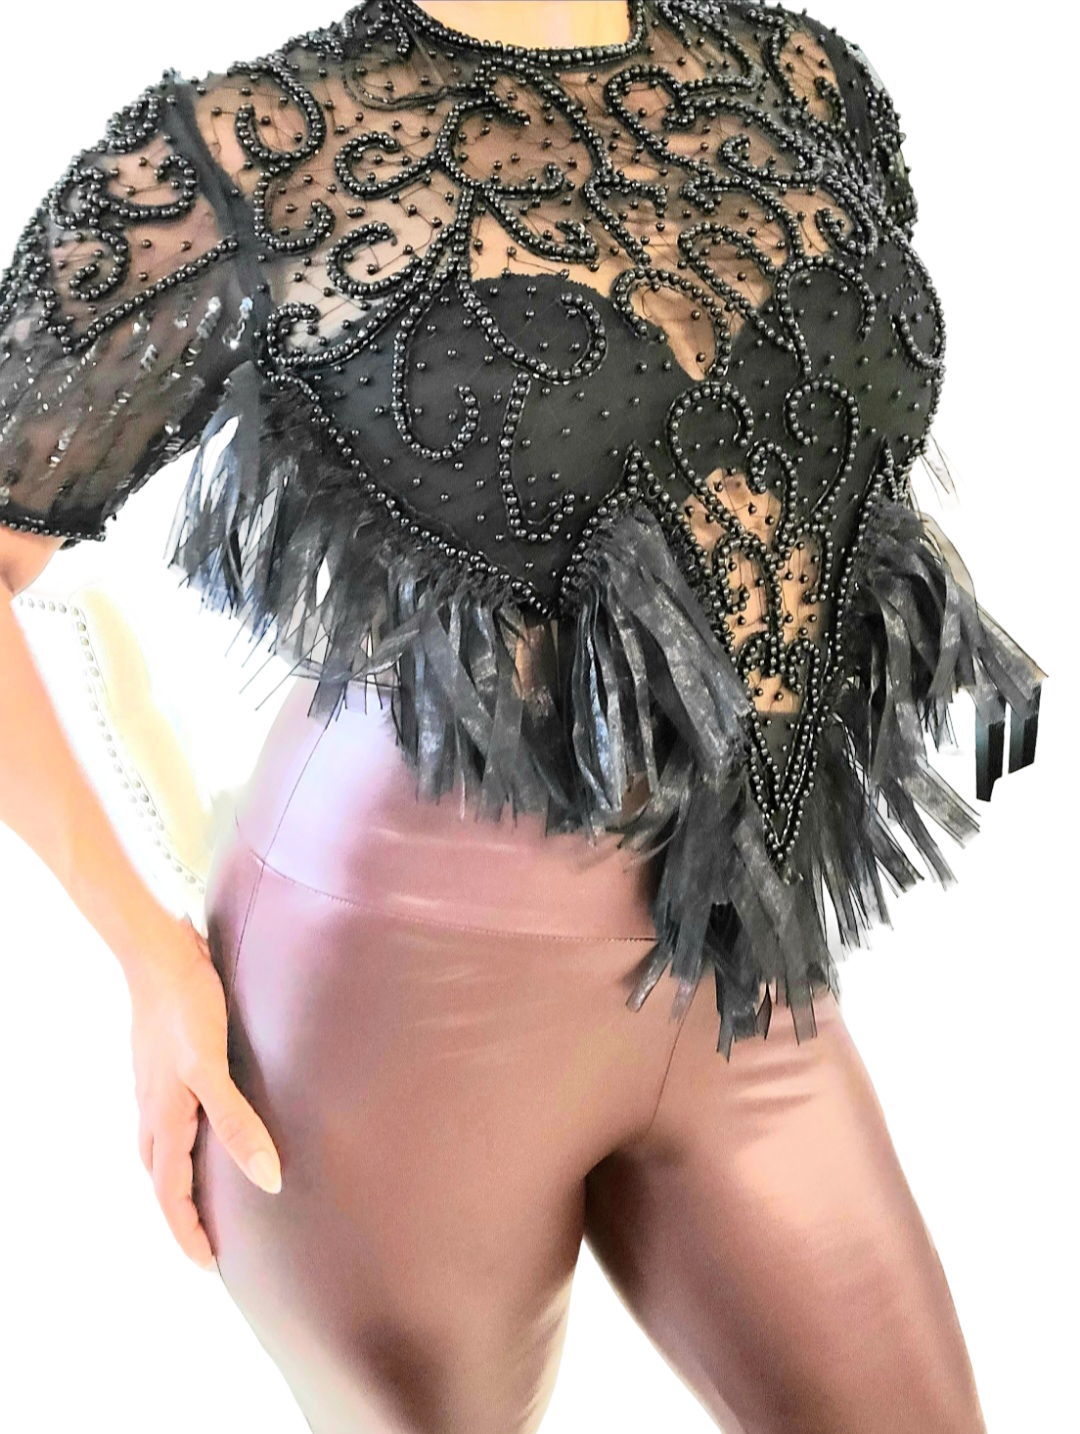 Magical Decorative Top Show Stopper. Sexy sheer. Ultimate feminine top.  Makes a statement. Eye-catching. It' all in the details. Crafted and re-vamp mesh fabric and beads details.  Round neck.  Beautiful flare. Backless with elastic band...